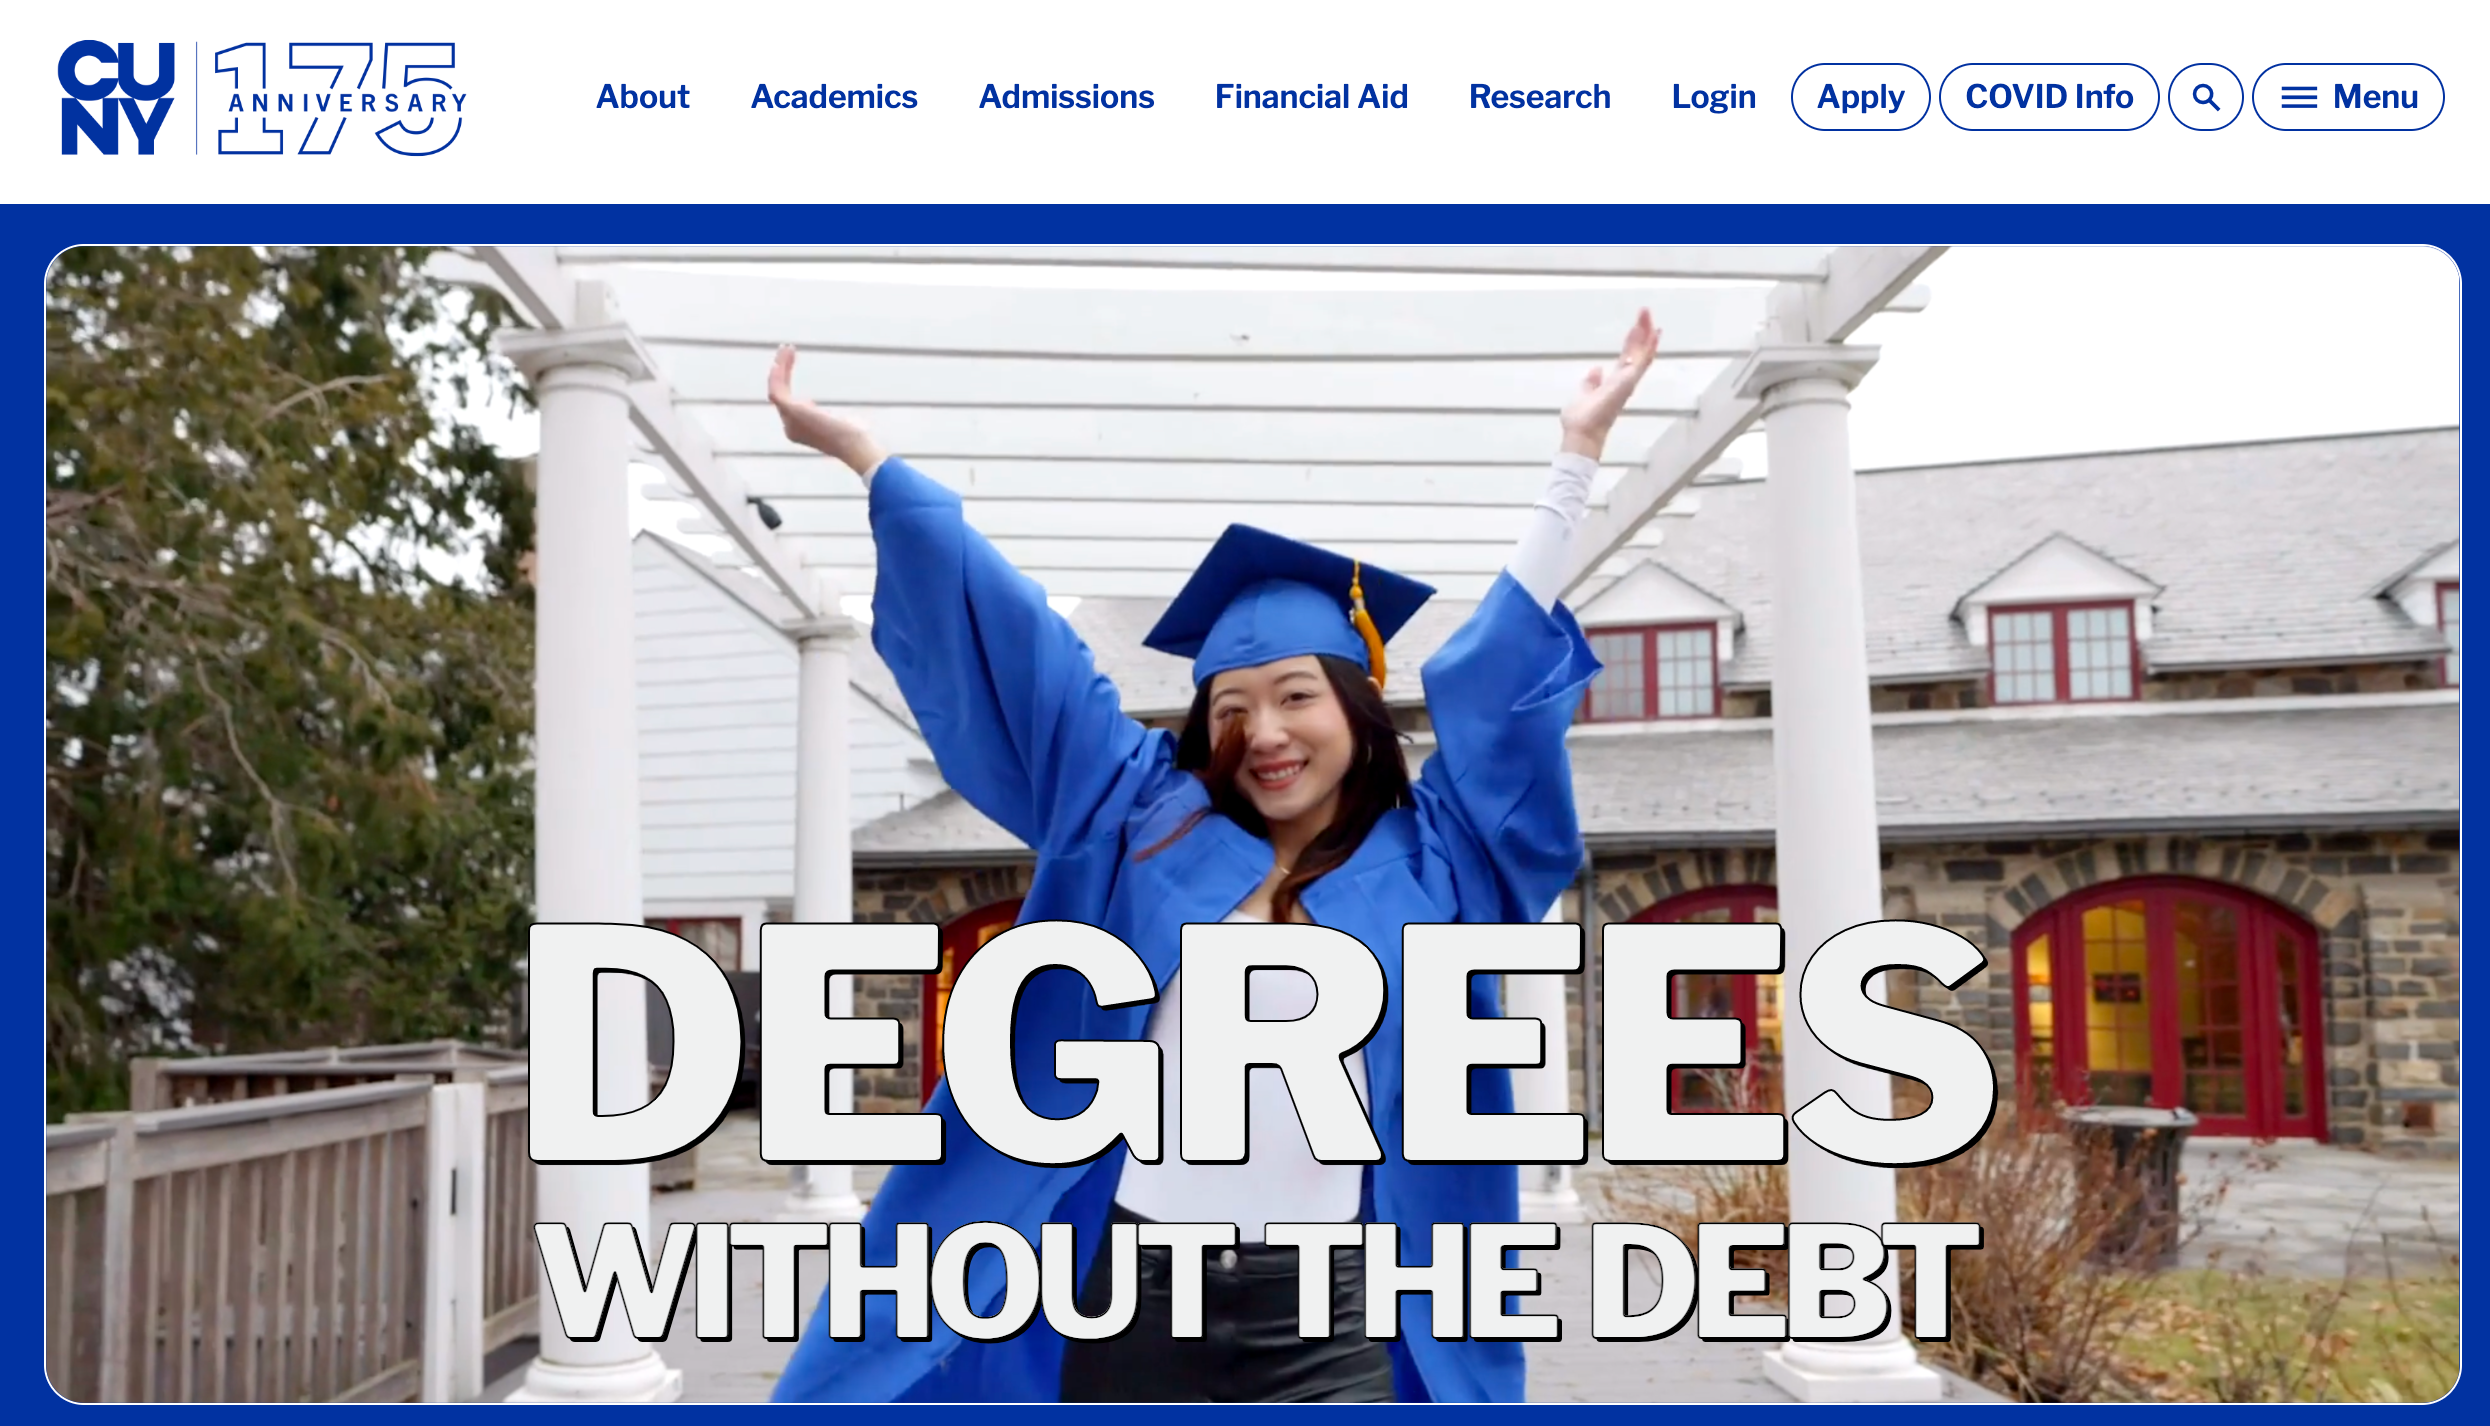 CUNY's homepage showing an video embedded.